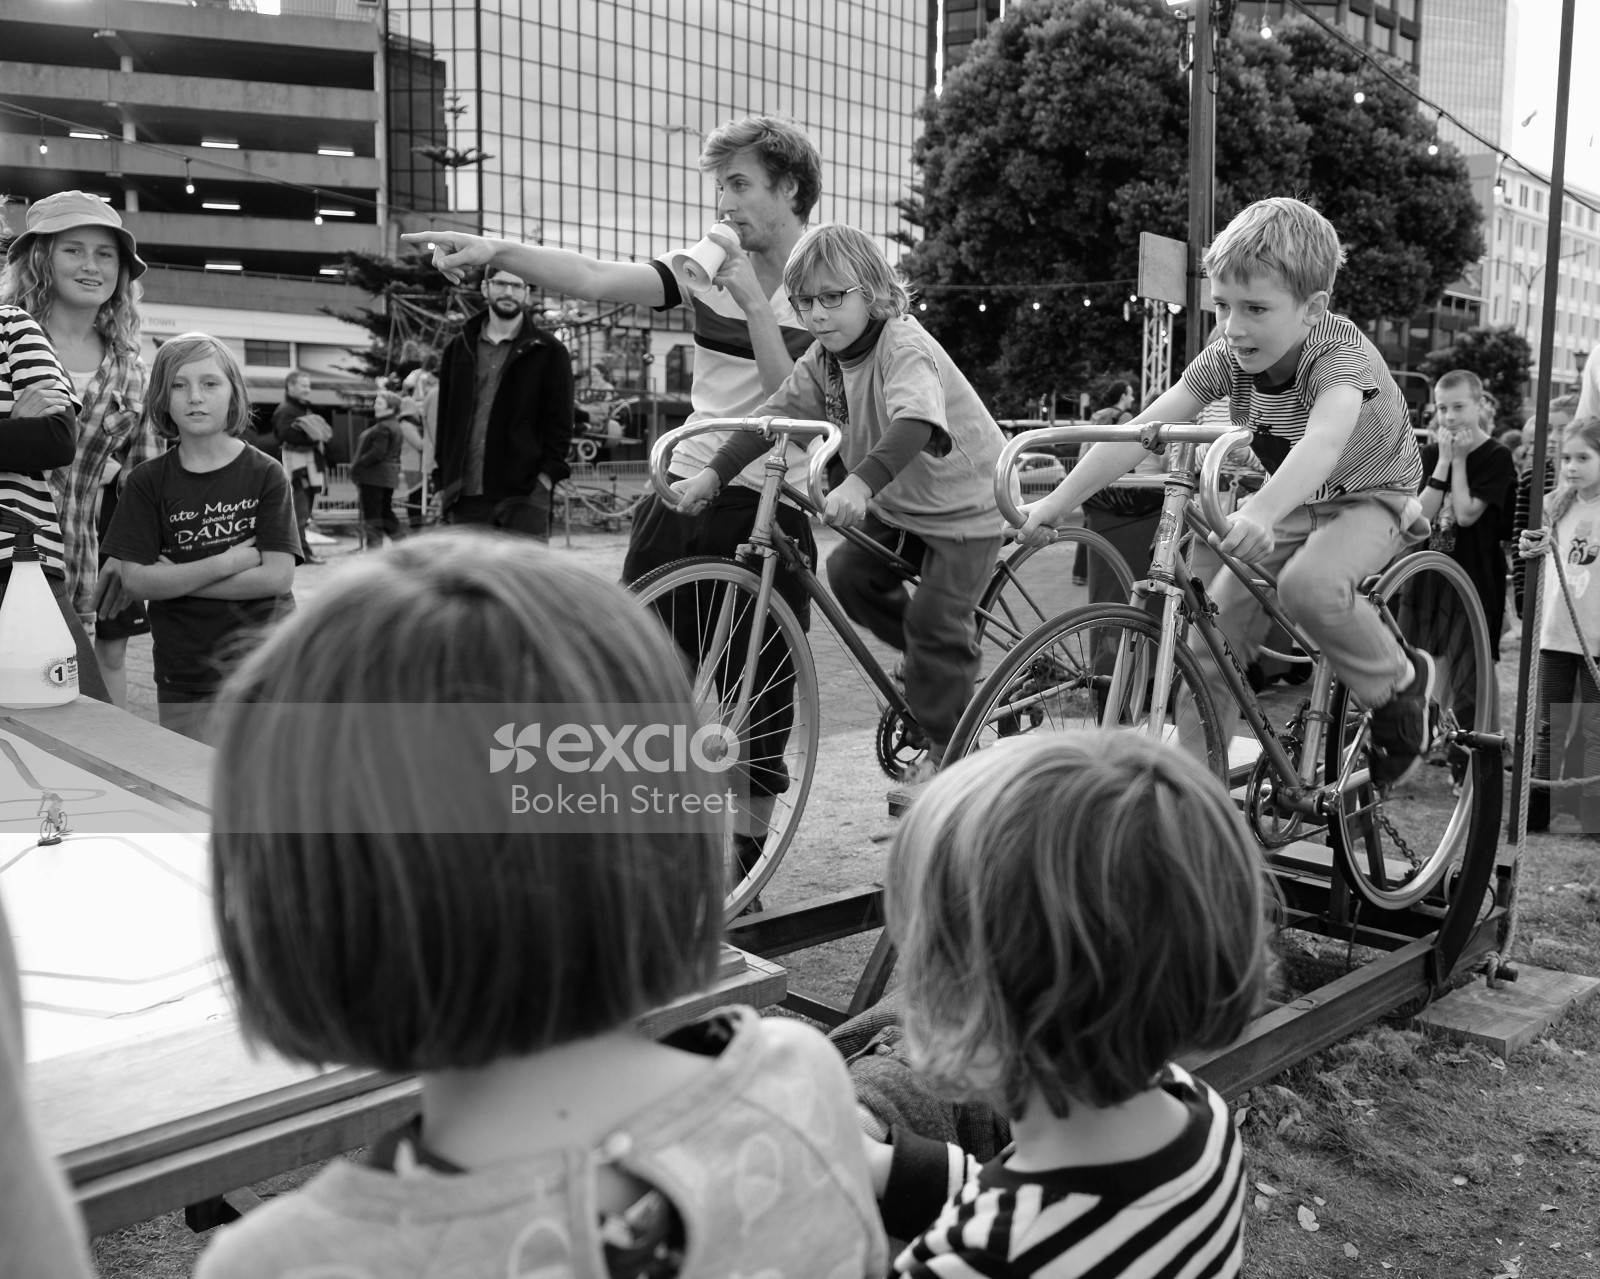 Children racing a stationary cycle at a festival black and white